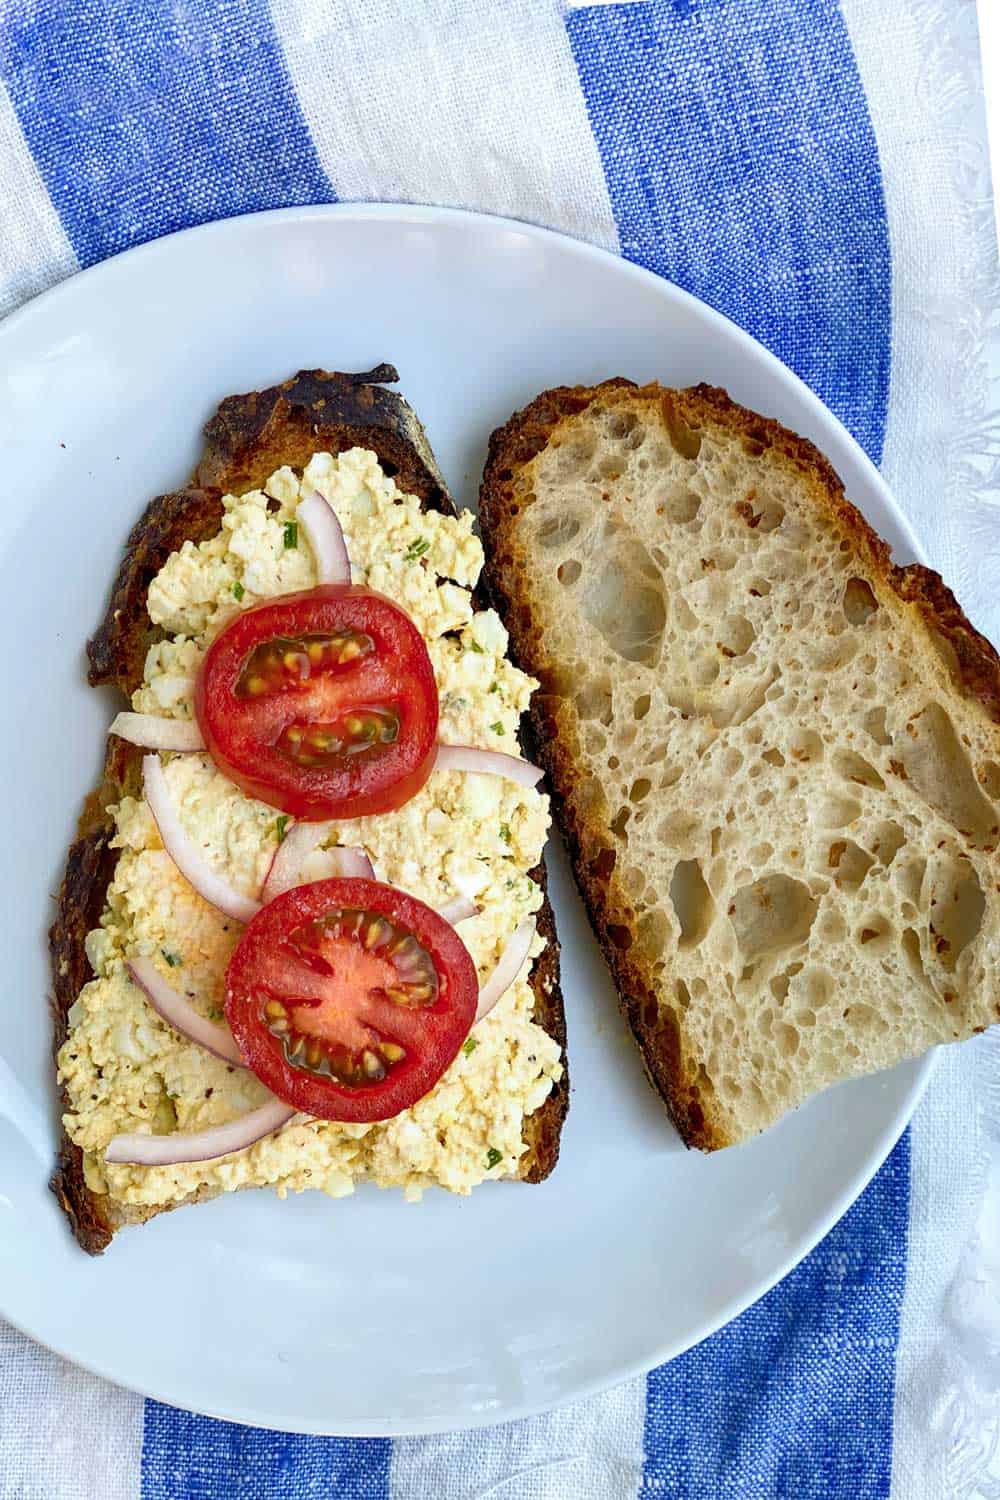 egg salad on toasted sour dough bread with red onions and sliced tomatoes